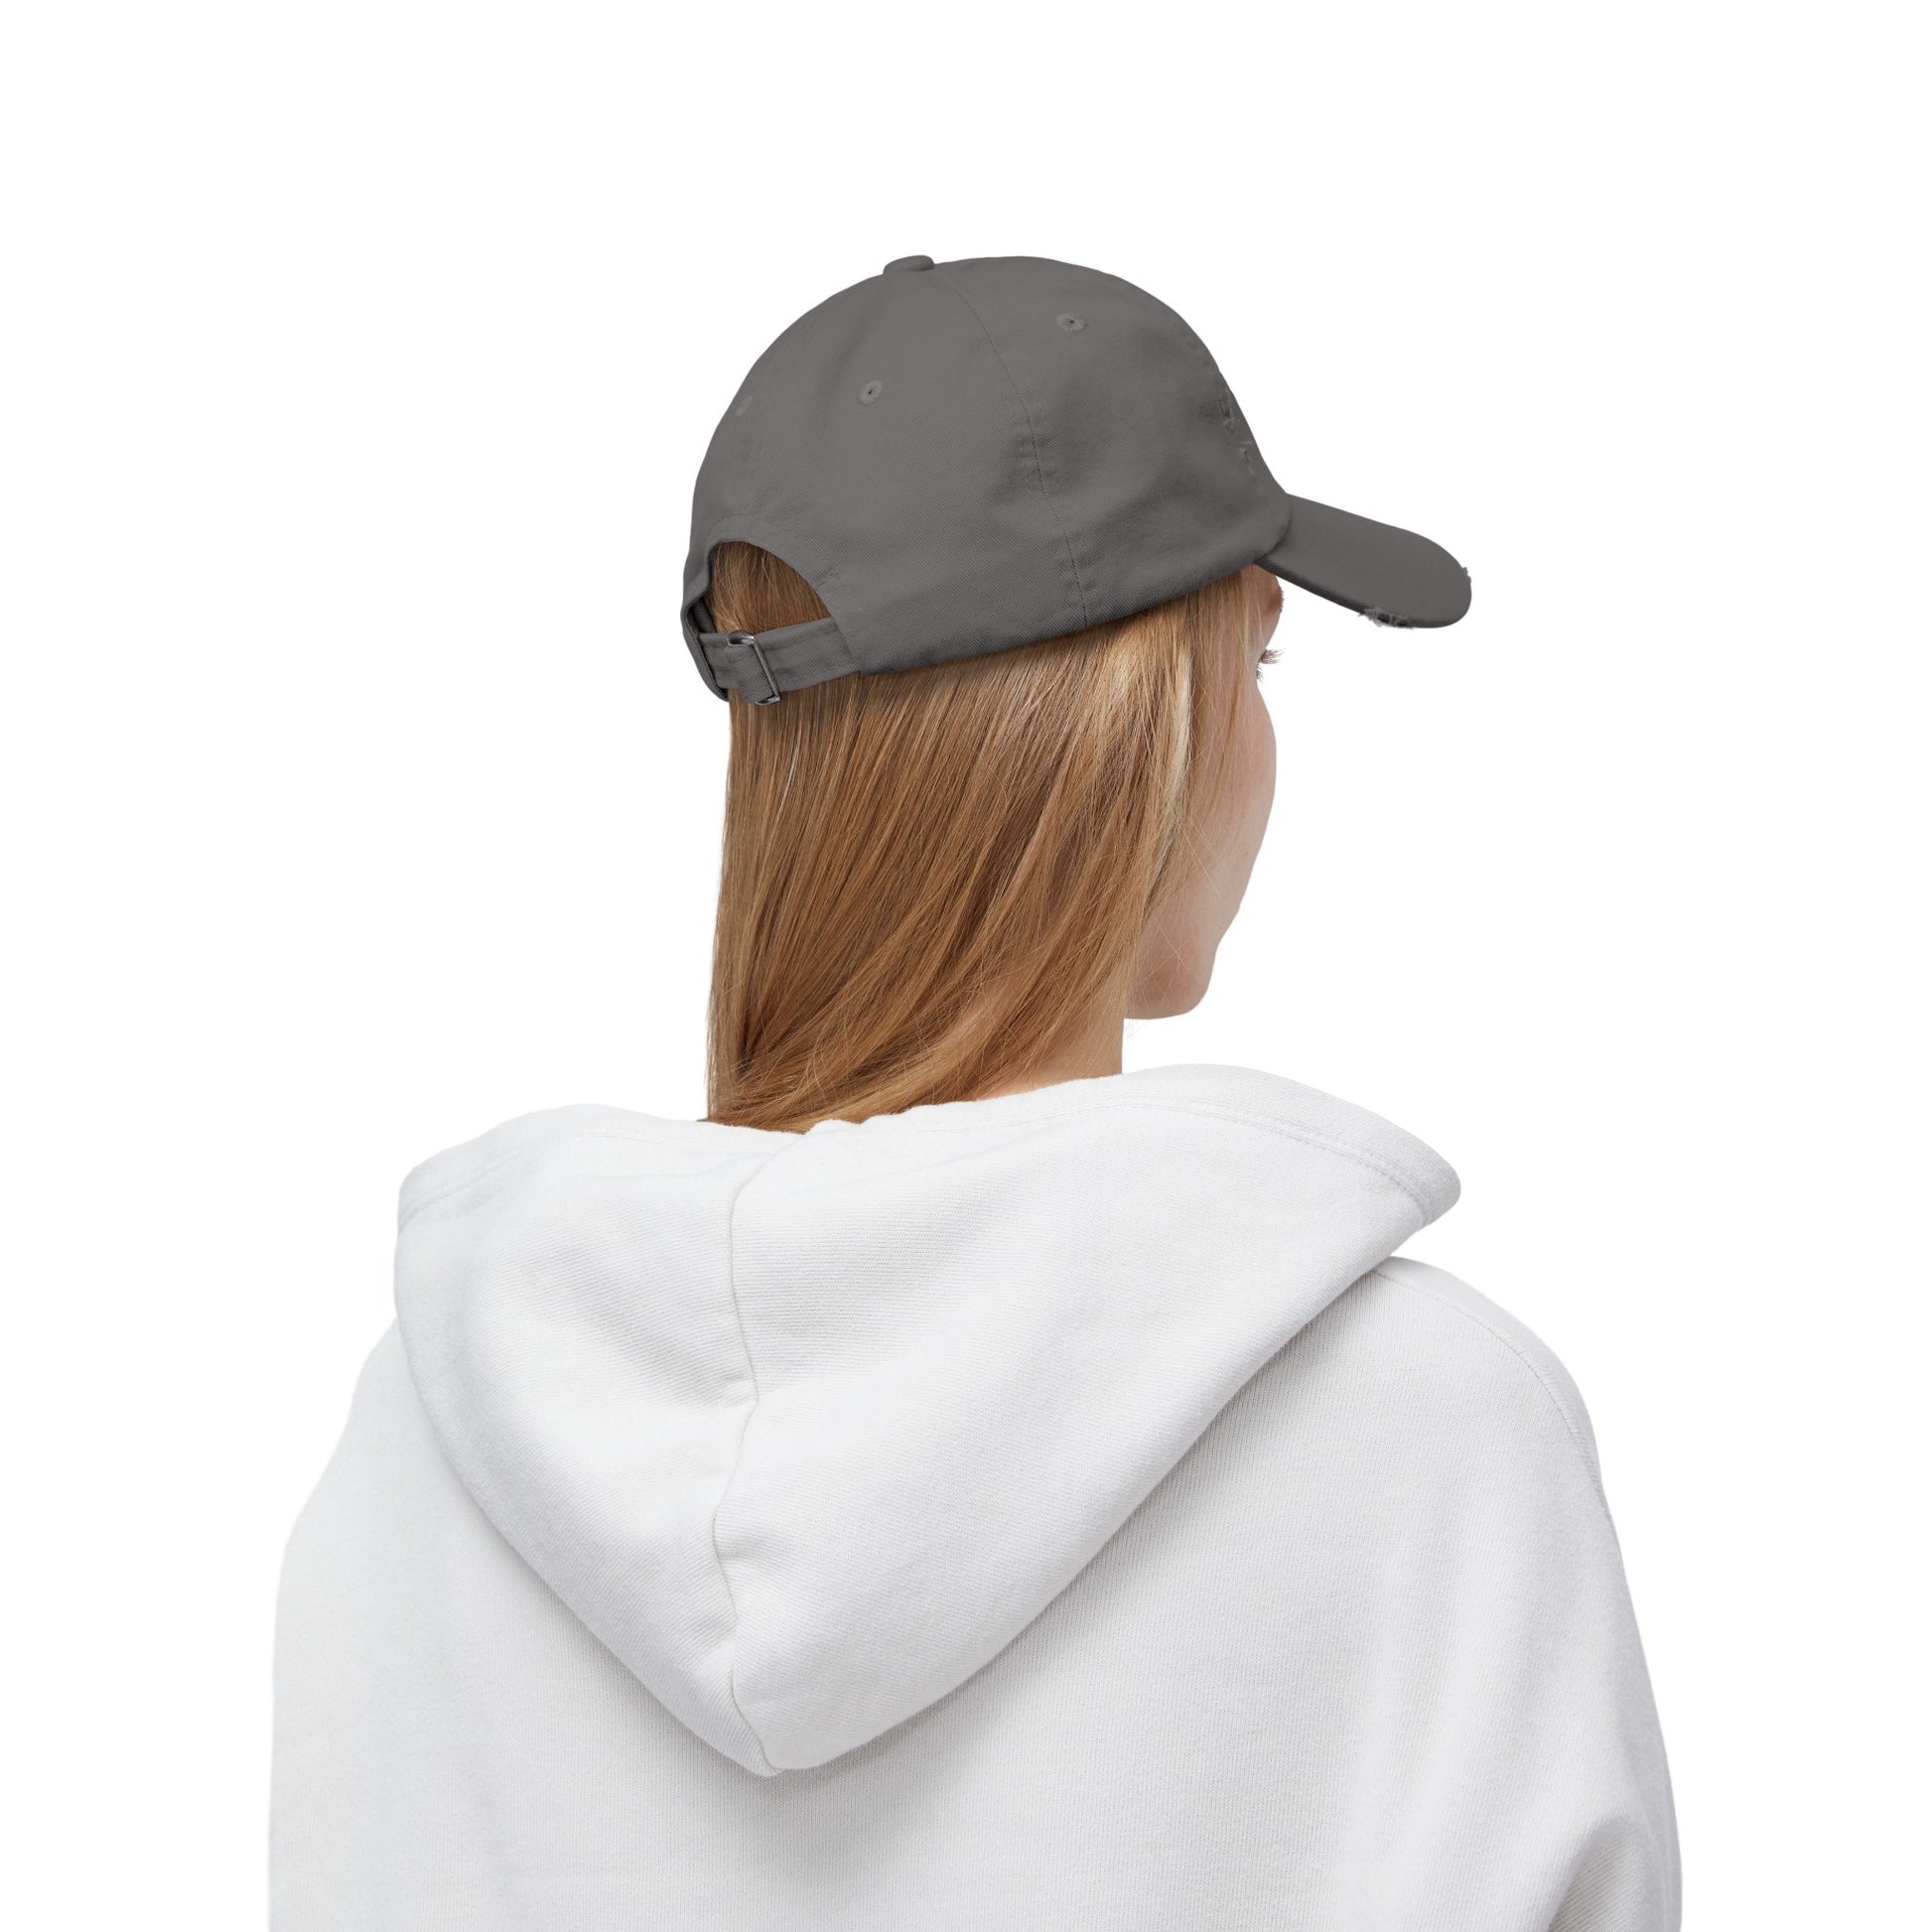 a woman wearing a white sweatshirt and a gray hat